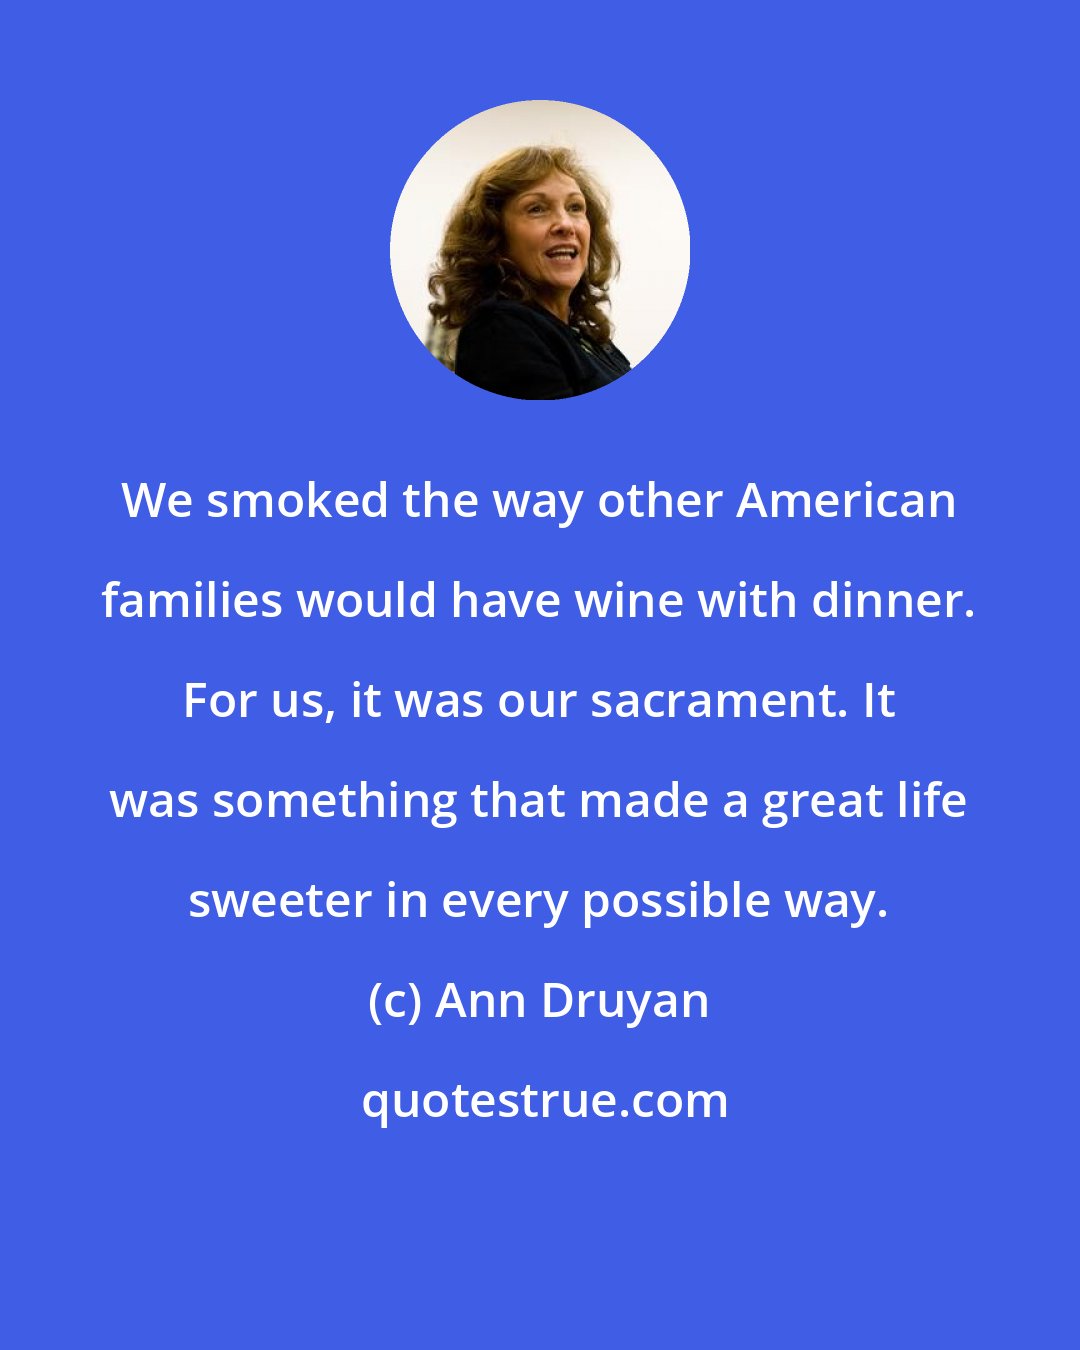 Ann Druyan: We smoked the way other American families would have wine with dinner. For us, it was our sacrament. It was something that made a great life sweeter in every possible way.